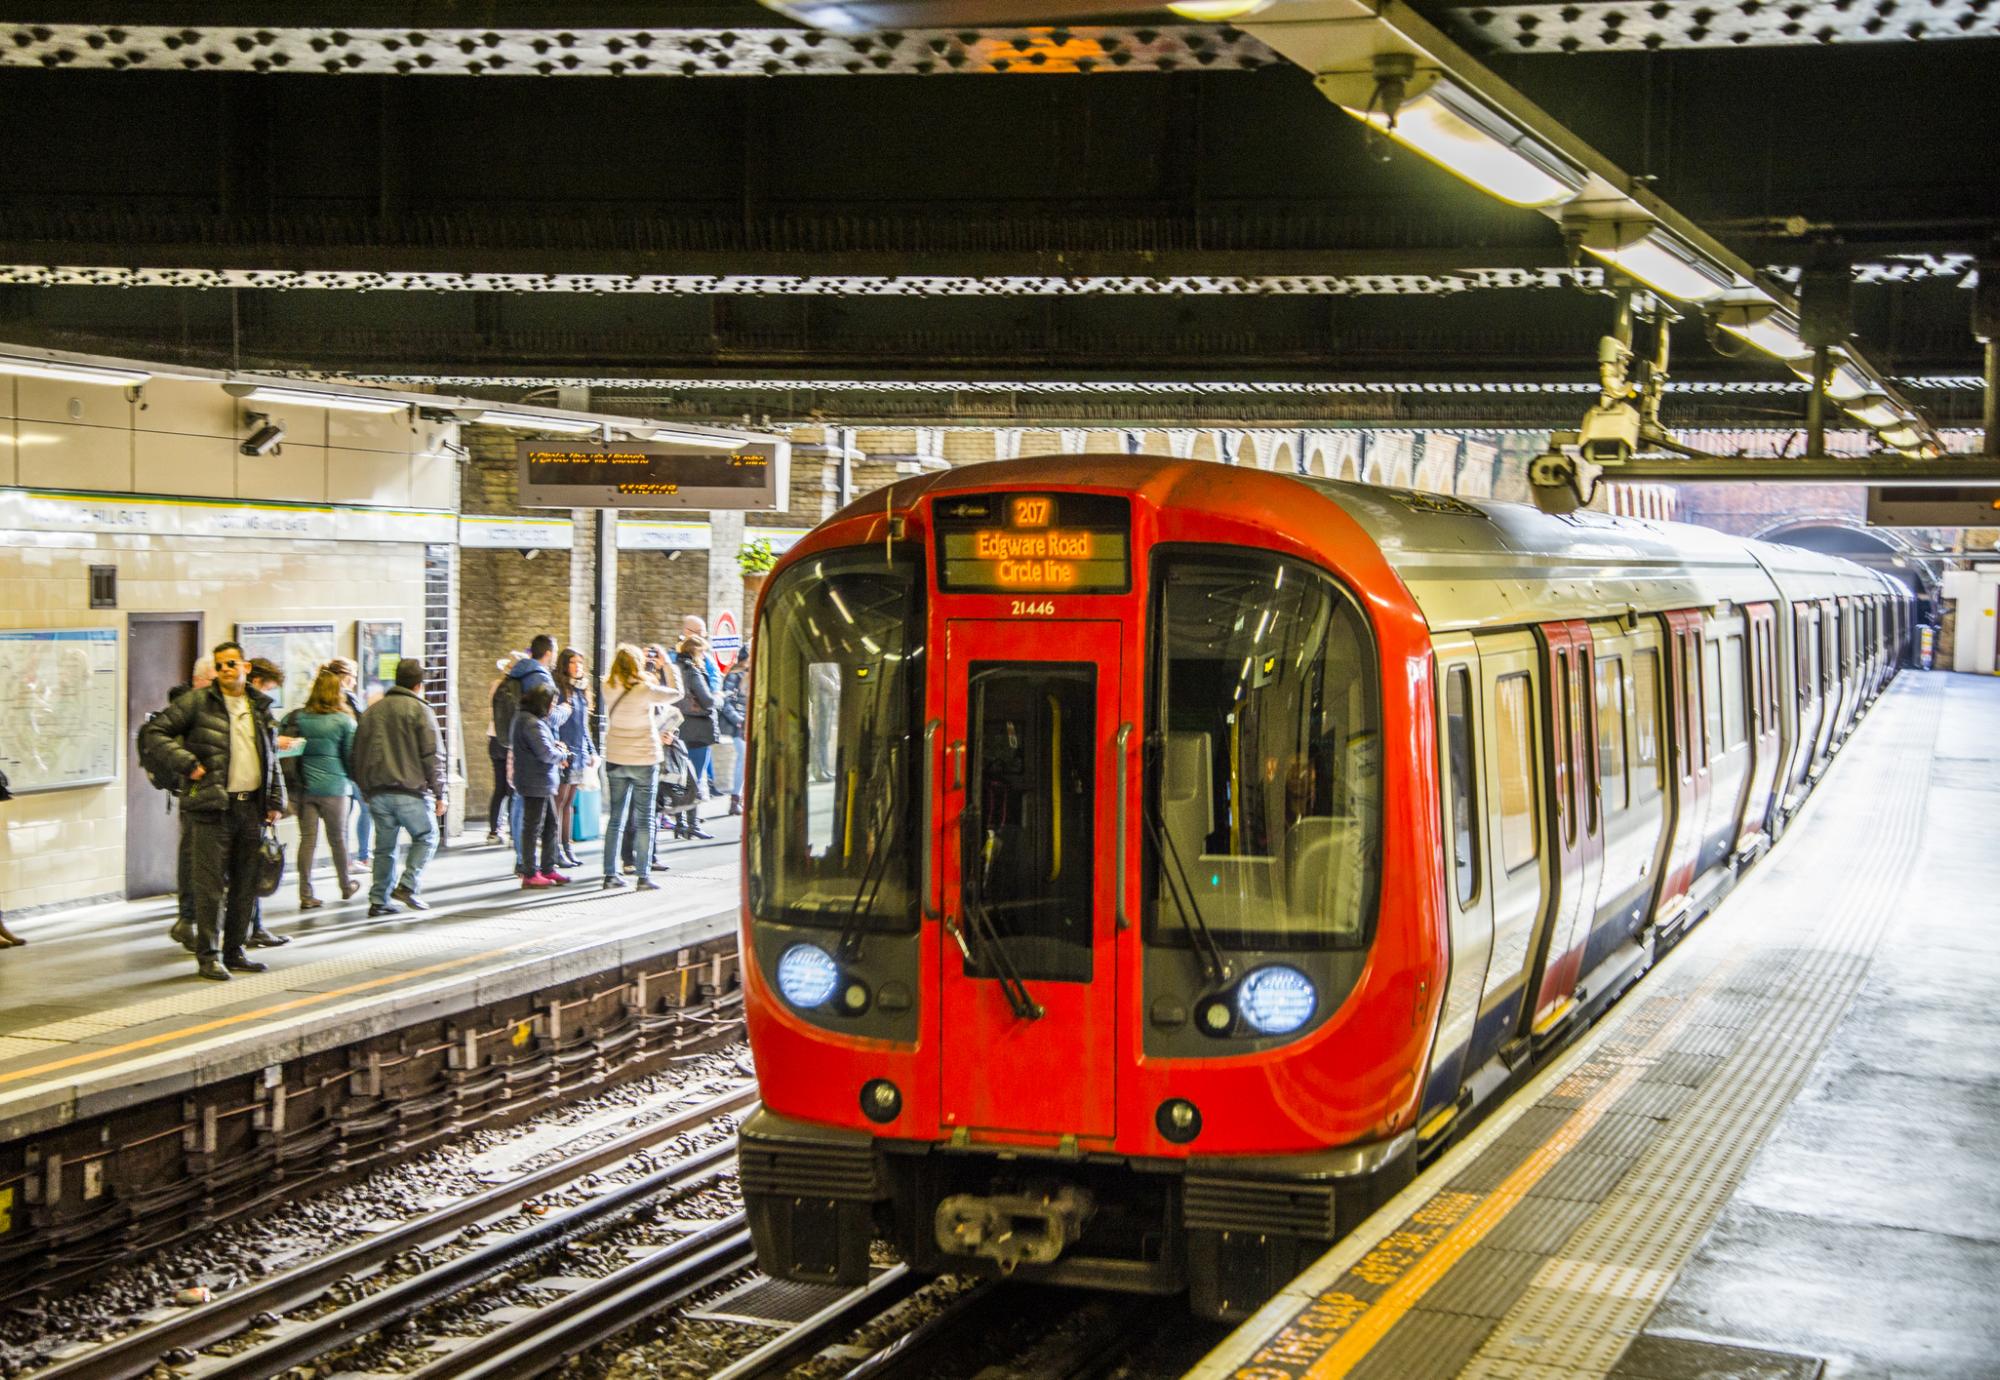 London Underground train arriving at a station